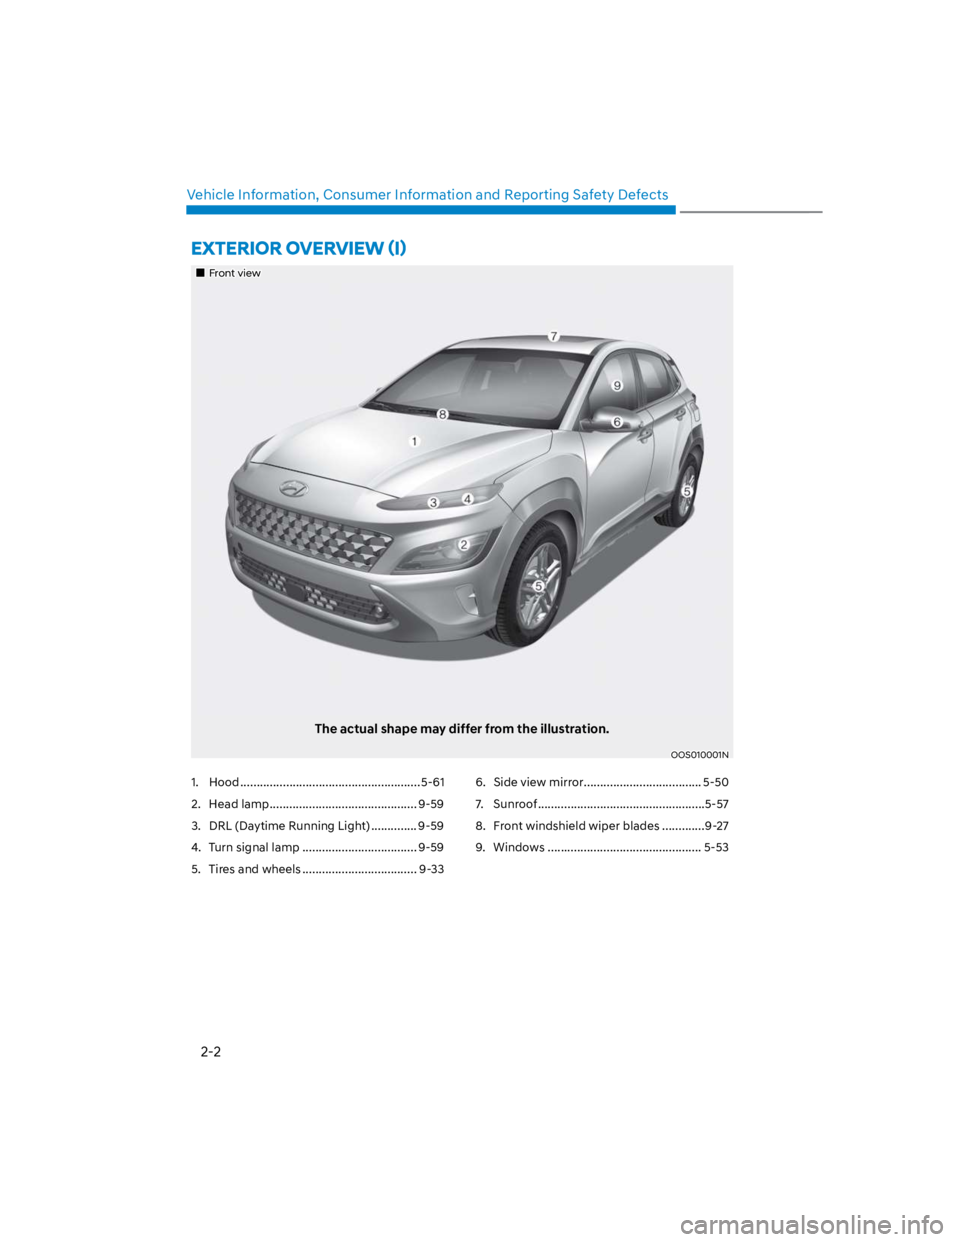 HYUNDAI KONA 2022 User Guide 2-2
Vehicle Information, Consumer Information and Reporting Safety Defects
Front view 
 
The actual shape may differ from the illustration.
OOS010001N 
1.  Hood .......................................